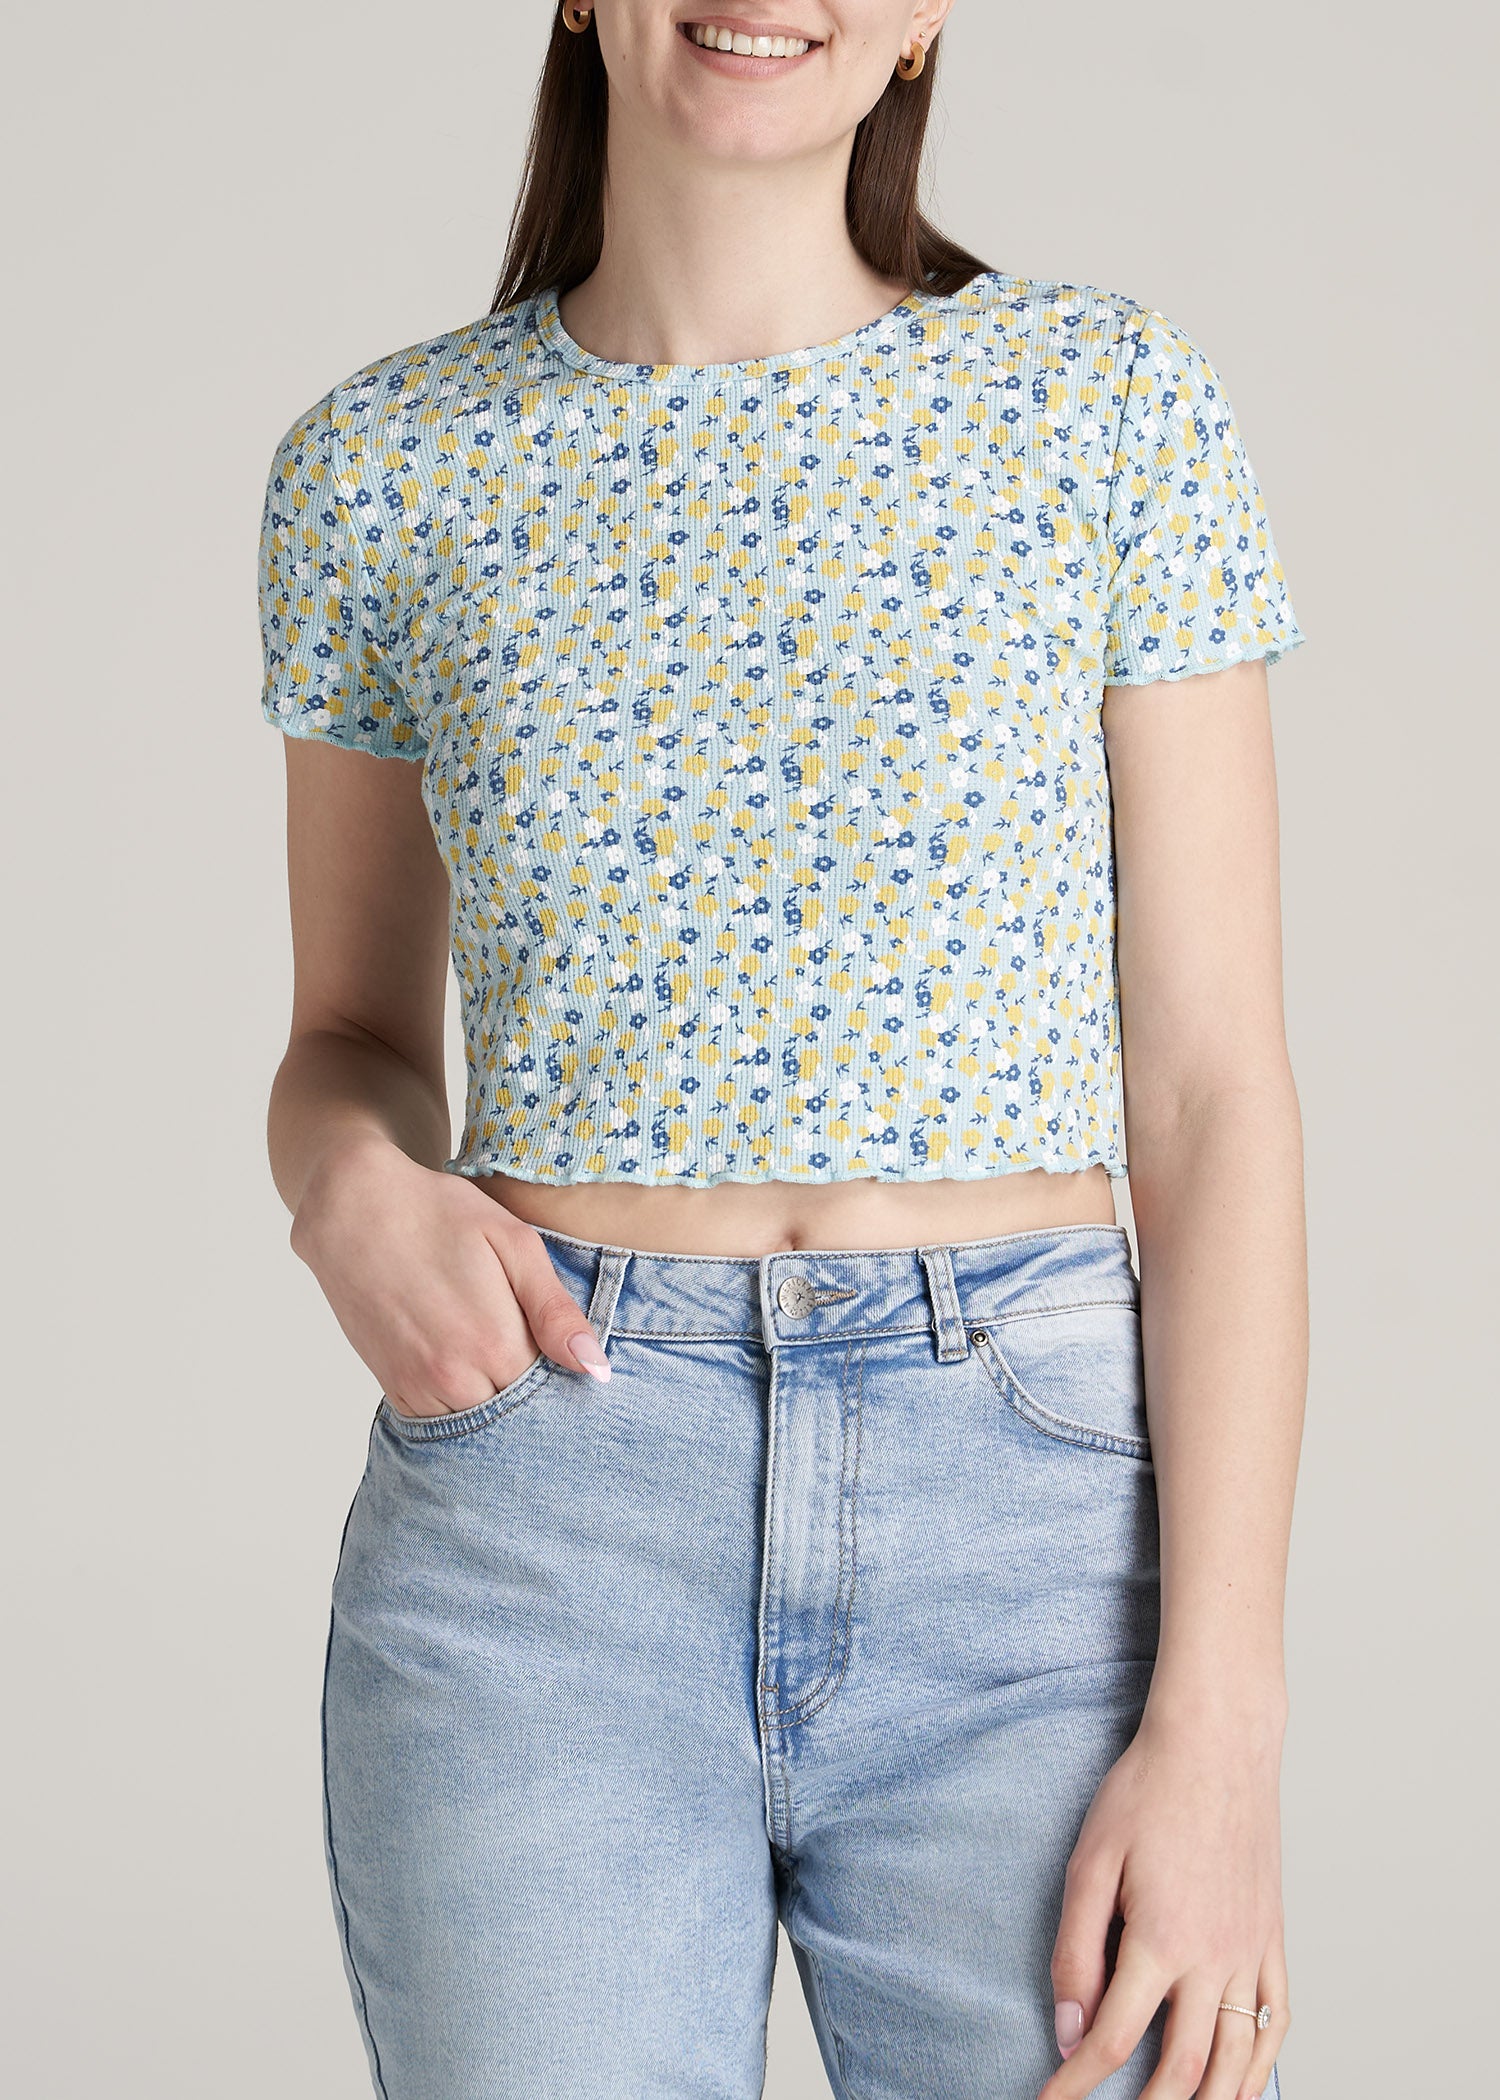 Cropped Waffle Tee in Corydalis Blue Floral - Women's Tall T-Shirts